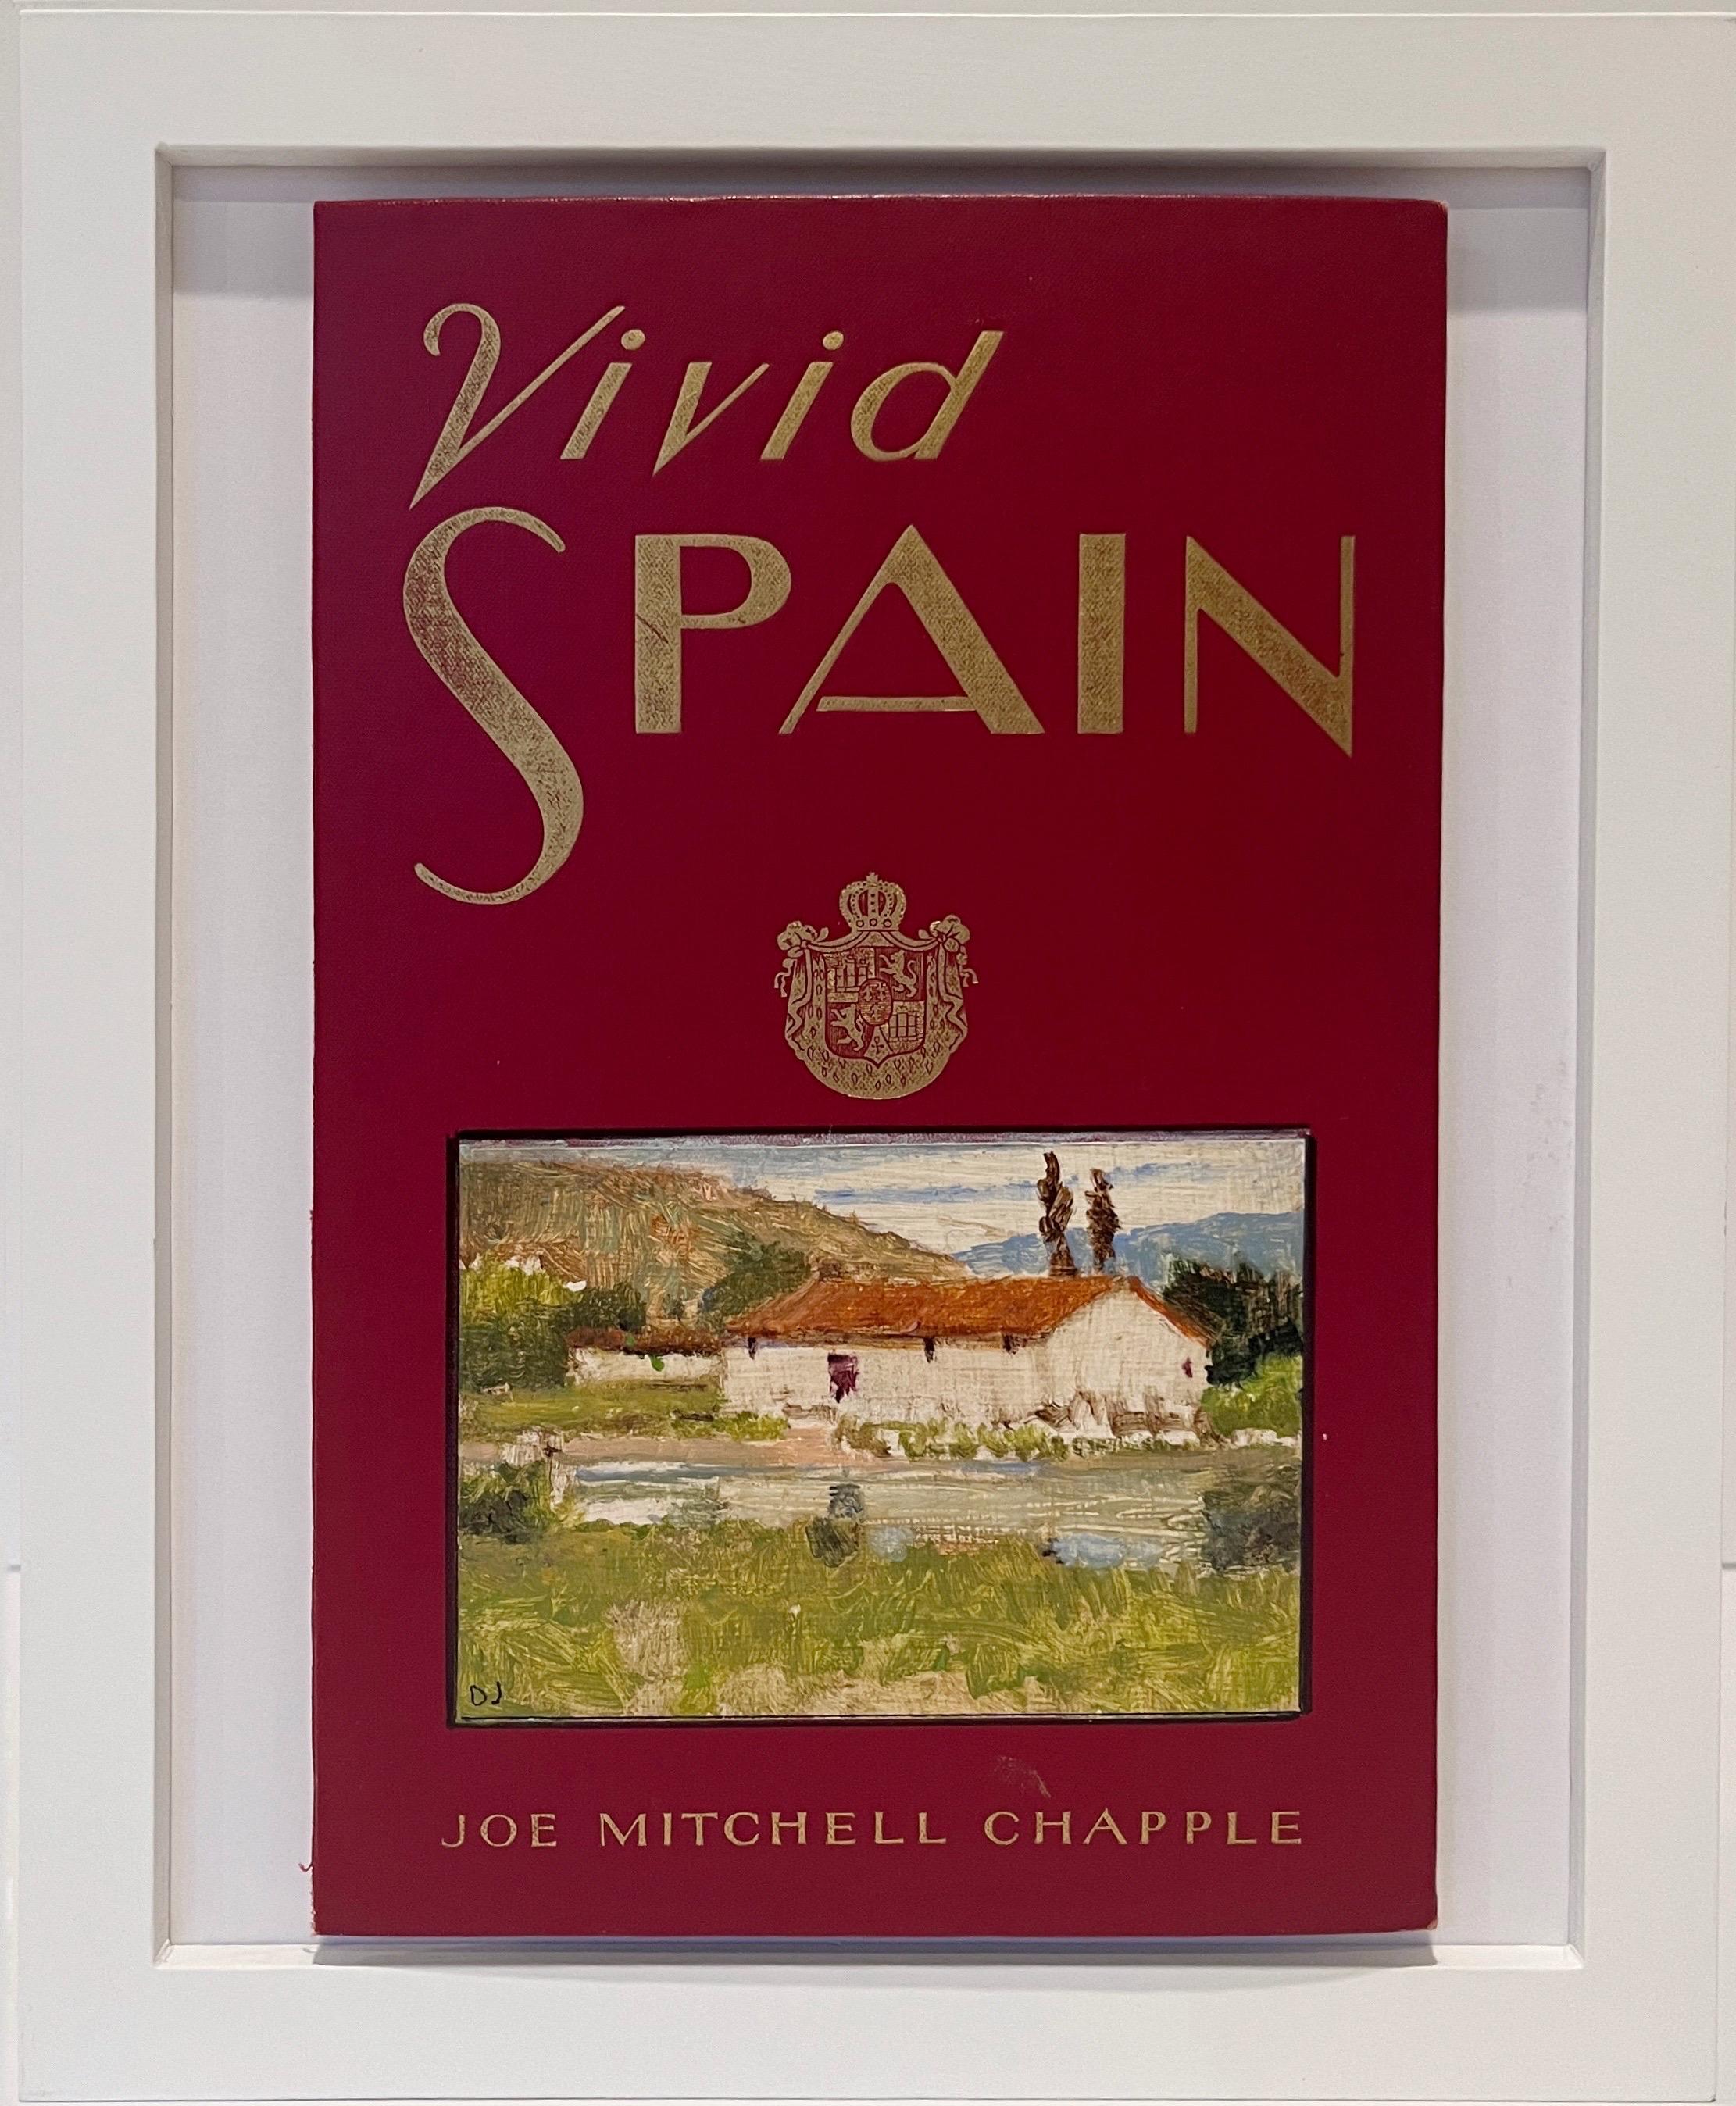 Vivid Spain - Painting by Donald Jurney